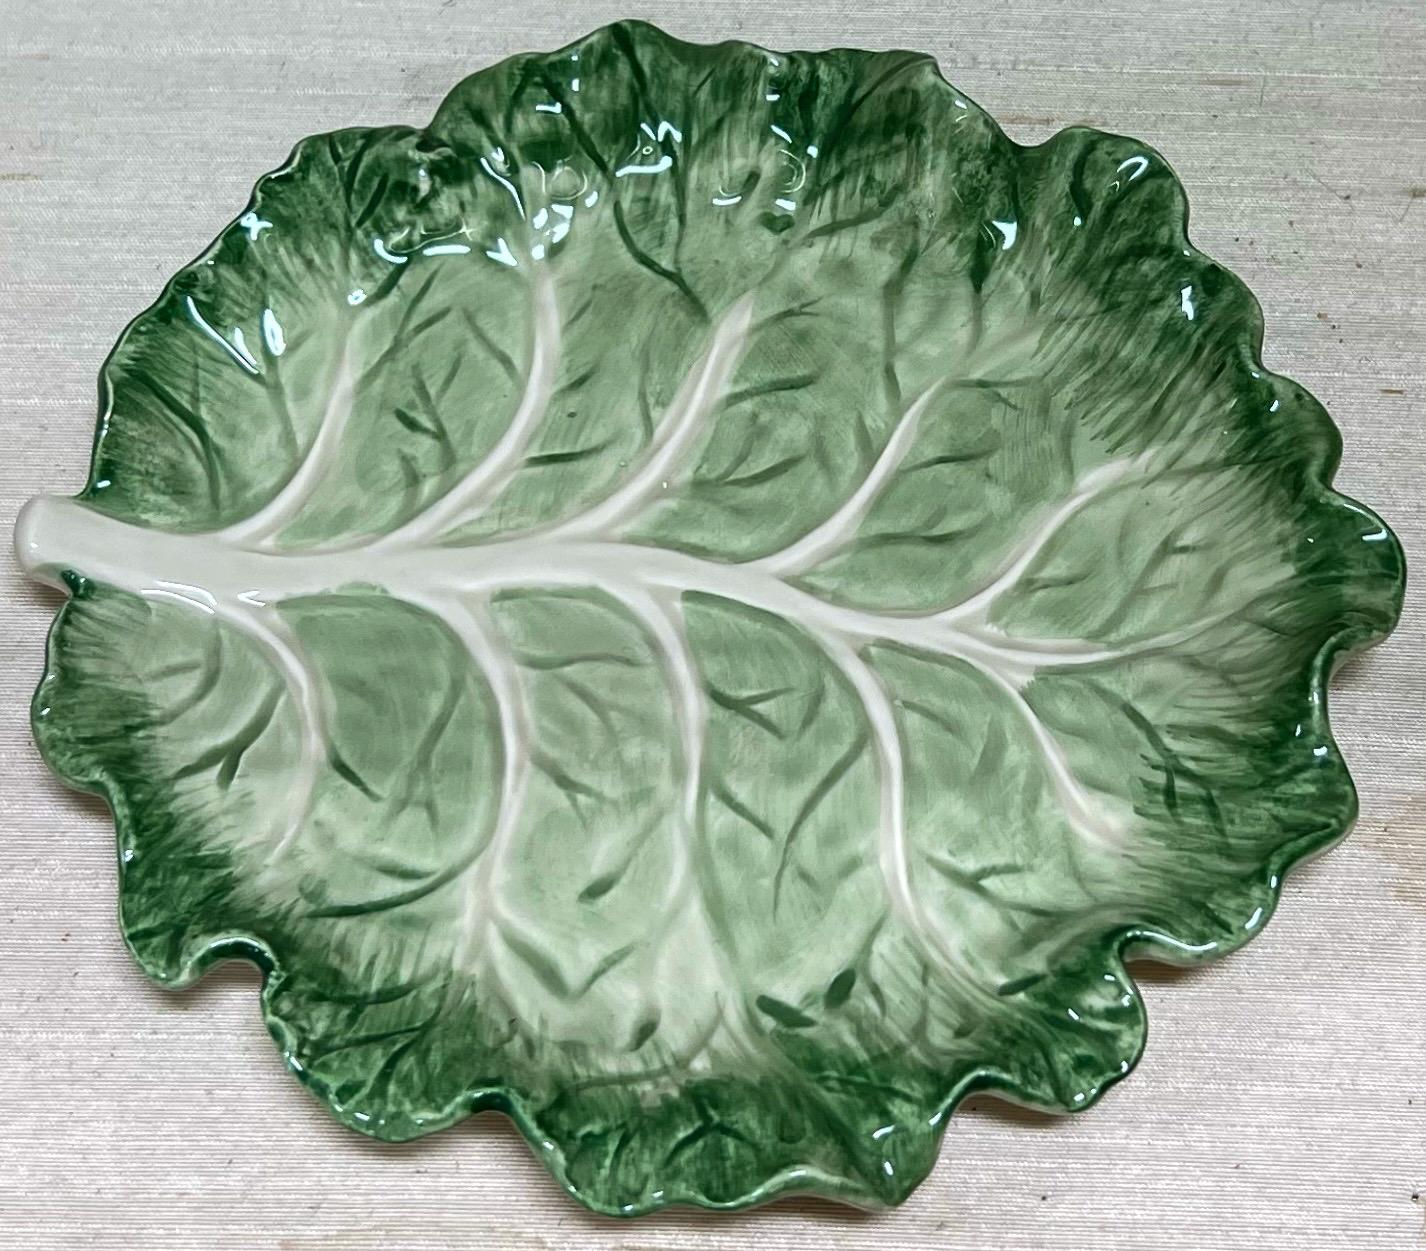 Victorian 1970s Fitz & Floyd Ironstone Lettuce / Cabbage Leaf Plates, S/12